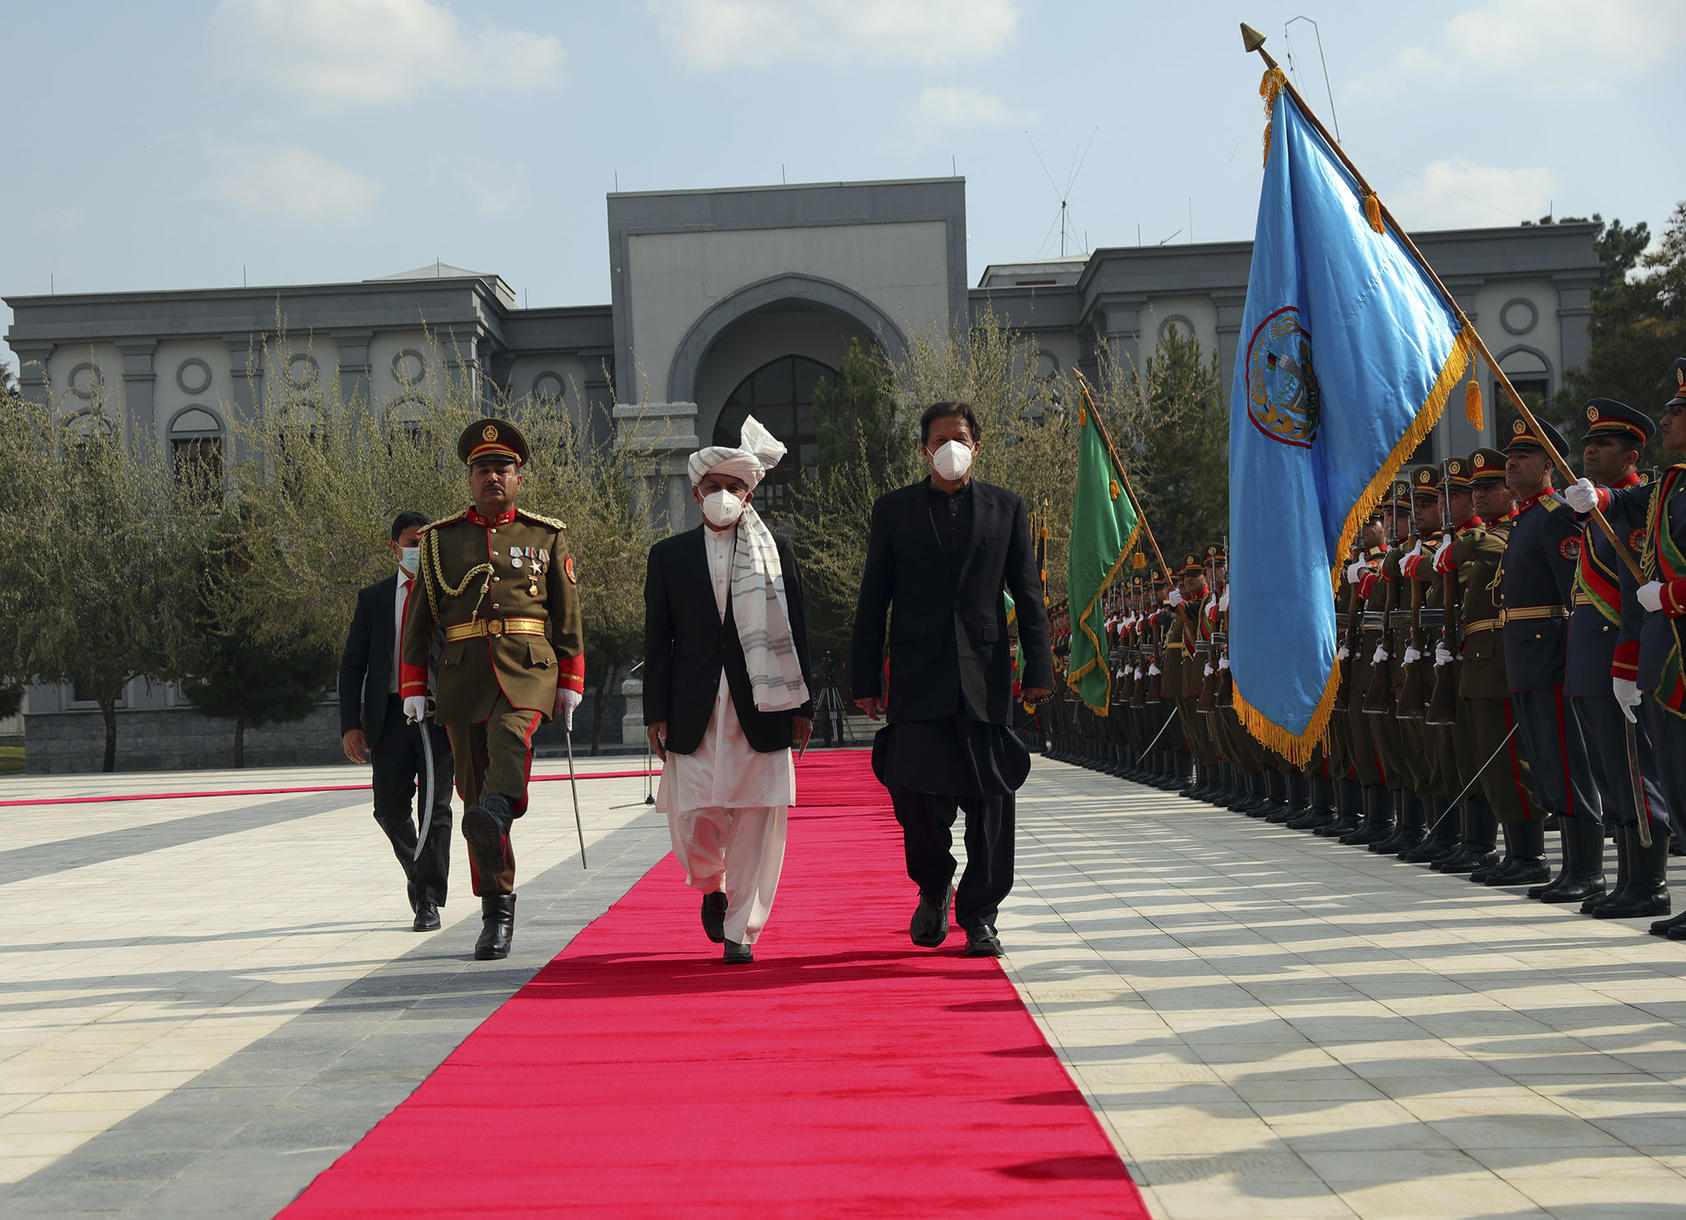 Afghan President Ashraf Ghani, center, and Pakistani Prime Minister Imran Khan, both wearing face masks because of the COVID-19 pandemic, inspect the honor guard before a news conference at the Presidential Palace in Kabul, Afghanistan, on November 19, 2020. (Rahmat Gul/AP)